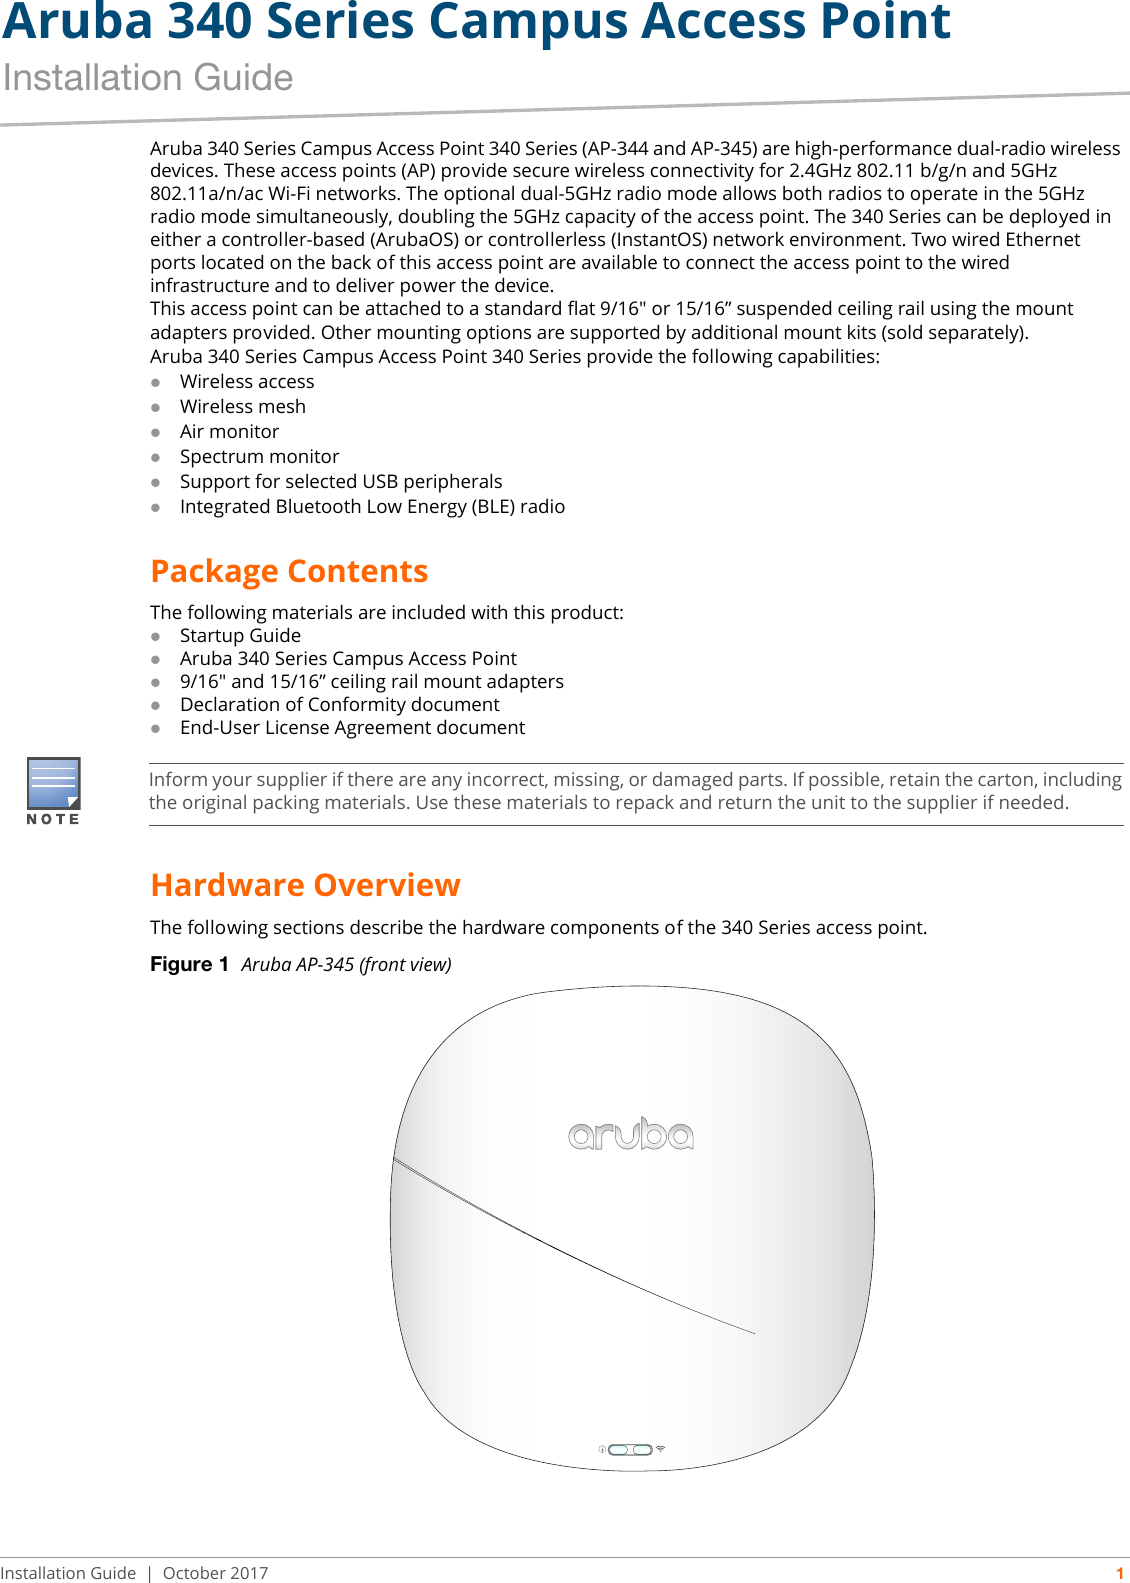 Aruba 340 Series Campus Access PointInstallation GuideInstallation Guide | October 2017 1Aruba 340 Series Campus Access Point 340 Series (AP-344 and AP-345) are high-performance dual-radio wireless devices. These access points (AP) provide secure wireless connectivity for 2.4GHz 802.11 b/g/n and 5GHz 802.11a/n/ac Wi-Fi networks. The optional dual-5GHz radio mode allows both radios to operate in the 5GHz radio mode simultaneously, doubling the 5GHz capacity of the access point. The 340 Series can be deployed in either a controller-based (ArubaOS) or controllerless (InstantOS) network environment. Two wired Ethernet ports located on the back of this access point are available to connect the access point to the wired infrastructure and to deliver power the device. This access point can be attached to a standard flat 9/16&quot; or 15/16” suspended ceiling rail using the mount adapters provided. Other mounting options are supported by additional mount kits (sold separately).Aruba 340 Series Campus Access Point 340 Series provide the following capabilities:Wireless accessWireless meshAir monitorSpectrum monitorSupport for selected USB peripheralsIntegrated Bluetooth Low Energy (BLE) radioPackage ContentsThe following materials are included with this product:Startup GuideAruba 340 Series Campus Access Point9/16&quot; and 15/16” ceiling rail mount adaptersDeclaration of Conformity documentEnd-User License Agreement documentHardware OverviewThe following sections describe the hardware components of the 340 Series access point.Figure 1  Aruba AP-345 (front view)Inform your supplier if there are any incorrect, missing, or damaged parts. If possible, retain the carton, including the original packing materials. Use these materials to repack and return the unit to the supplier if needed.